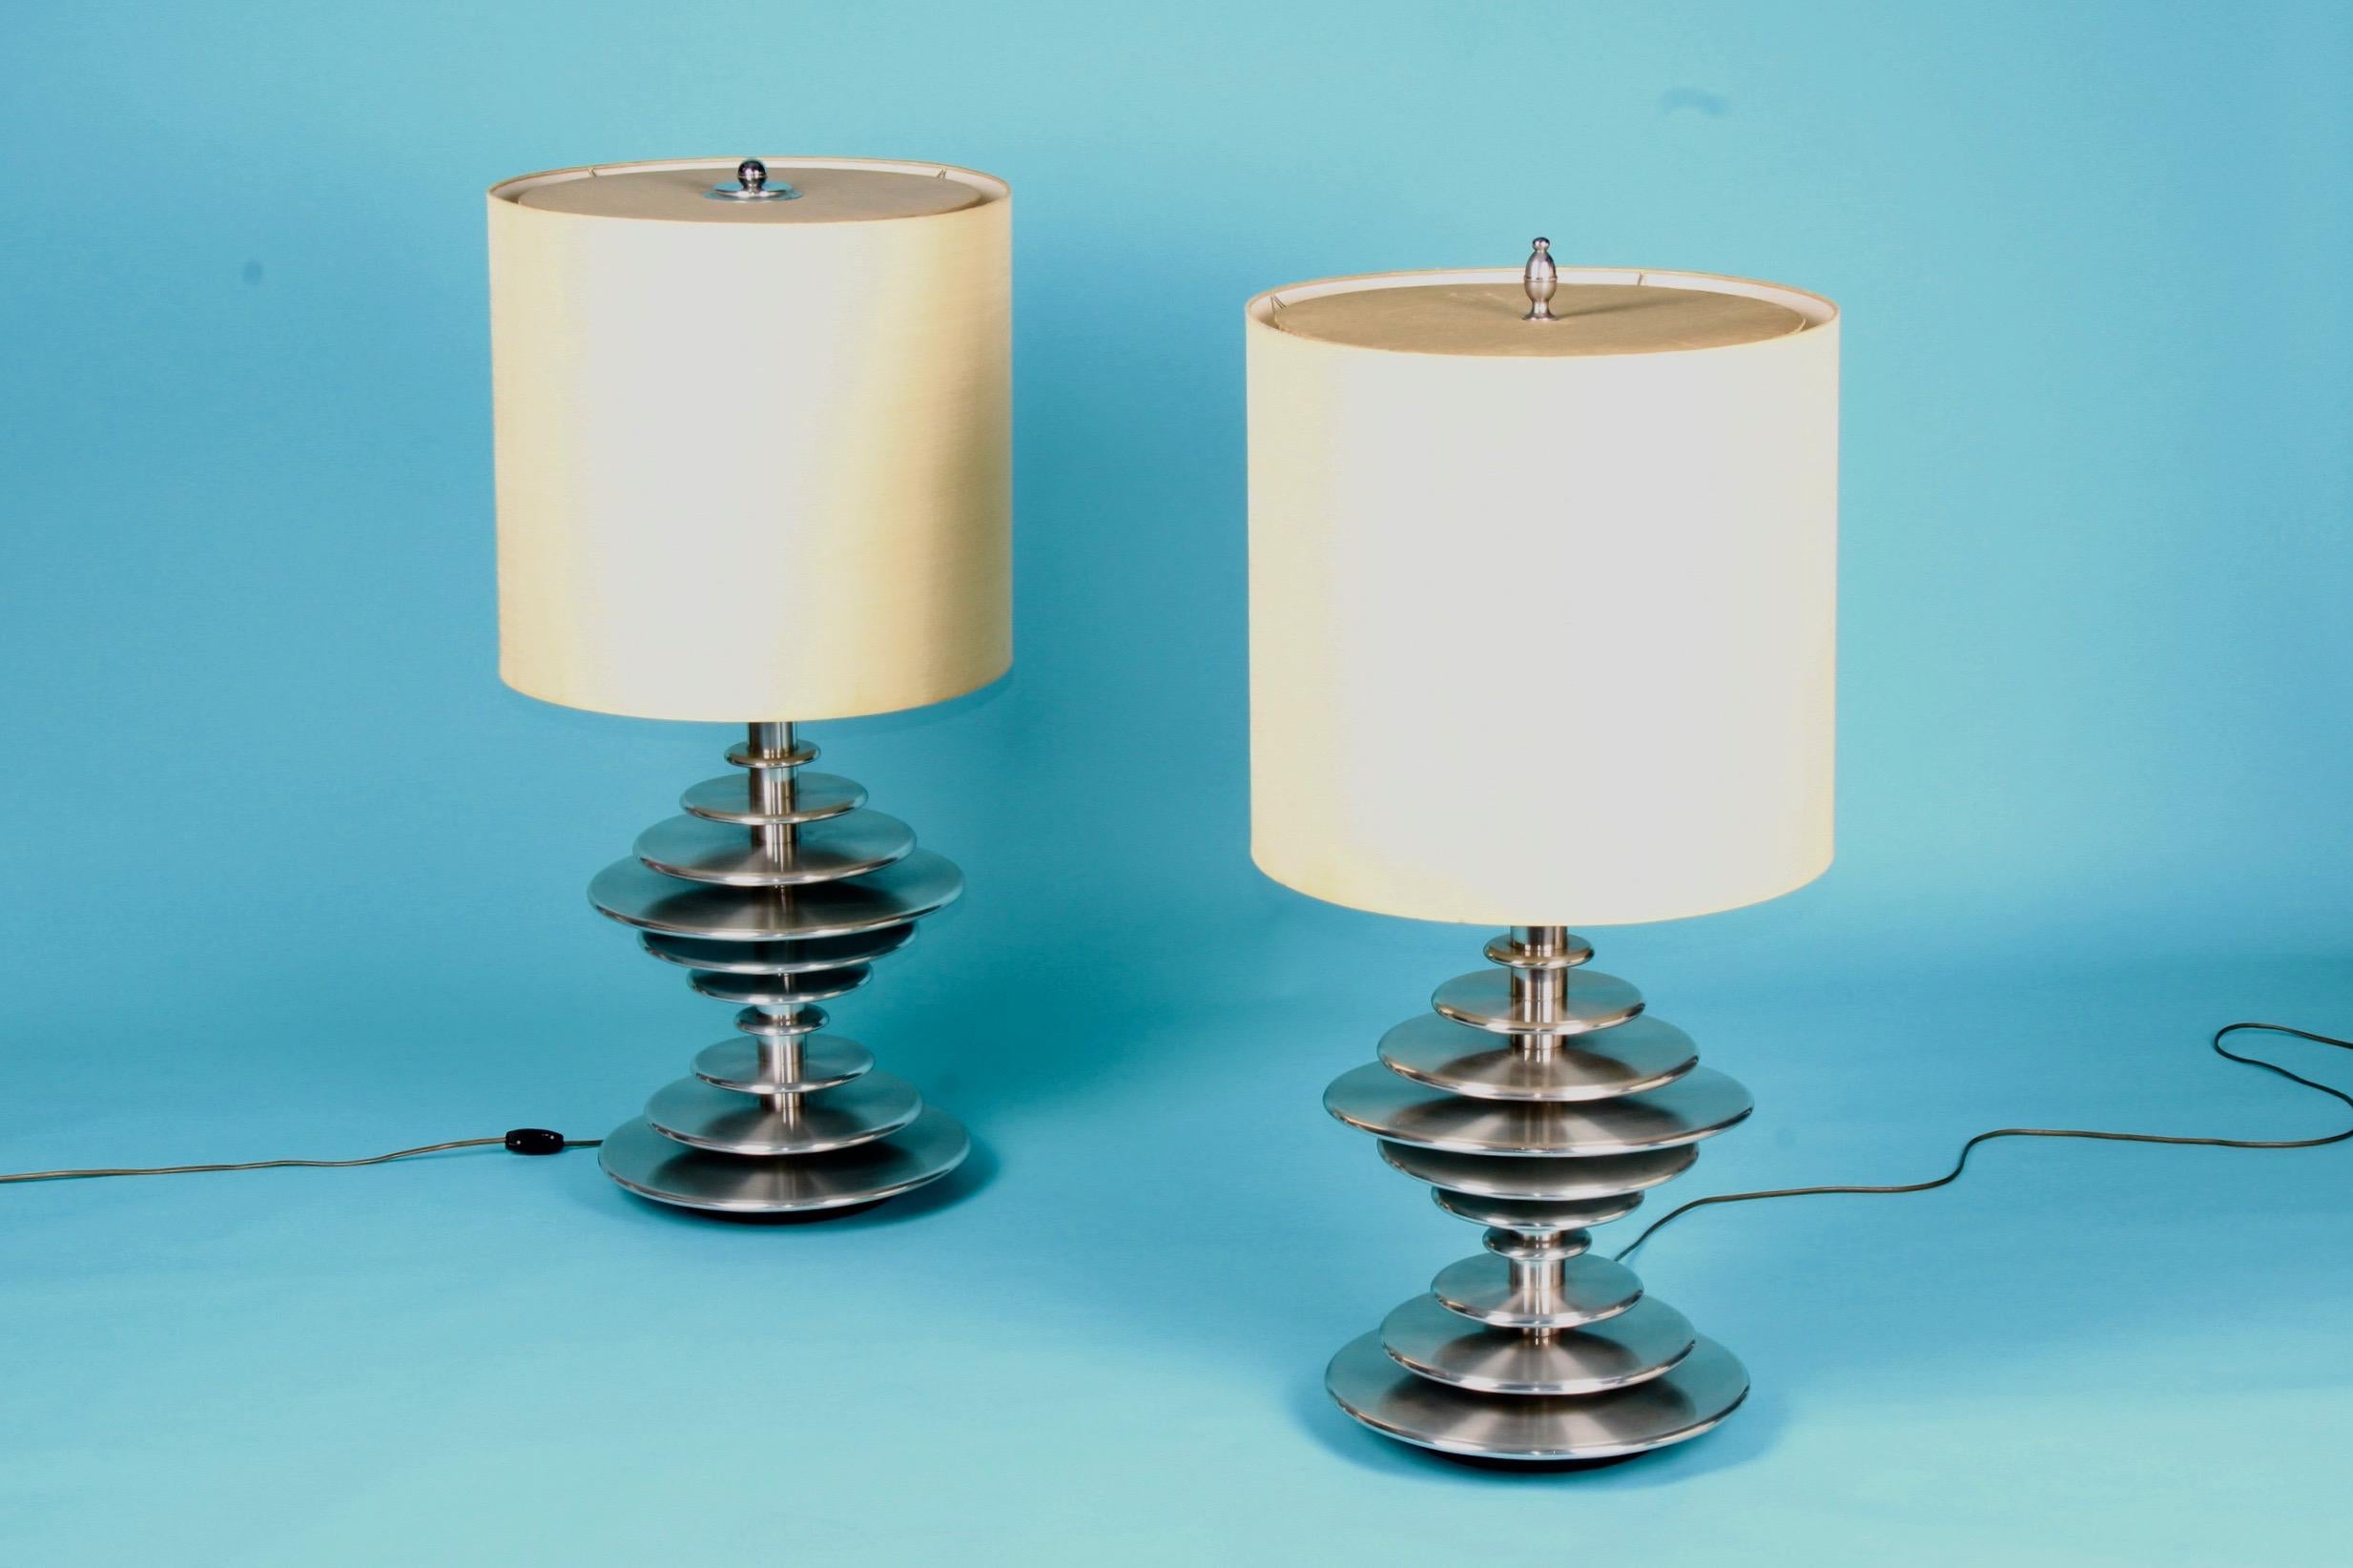 Pair of chromed metal table lamp, the shade is damaged see photo, dimensions with out shade height 91 cm, diameter 34 cm.